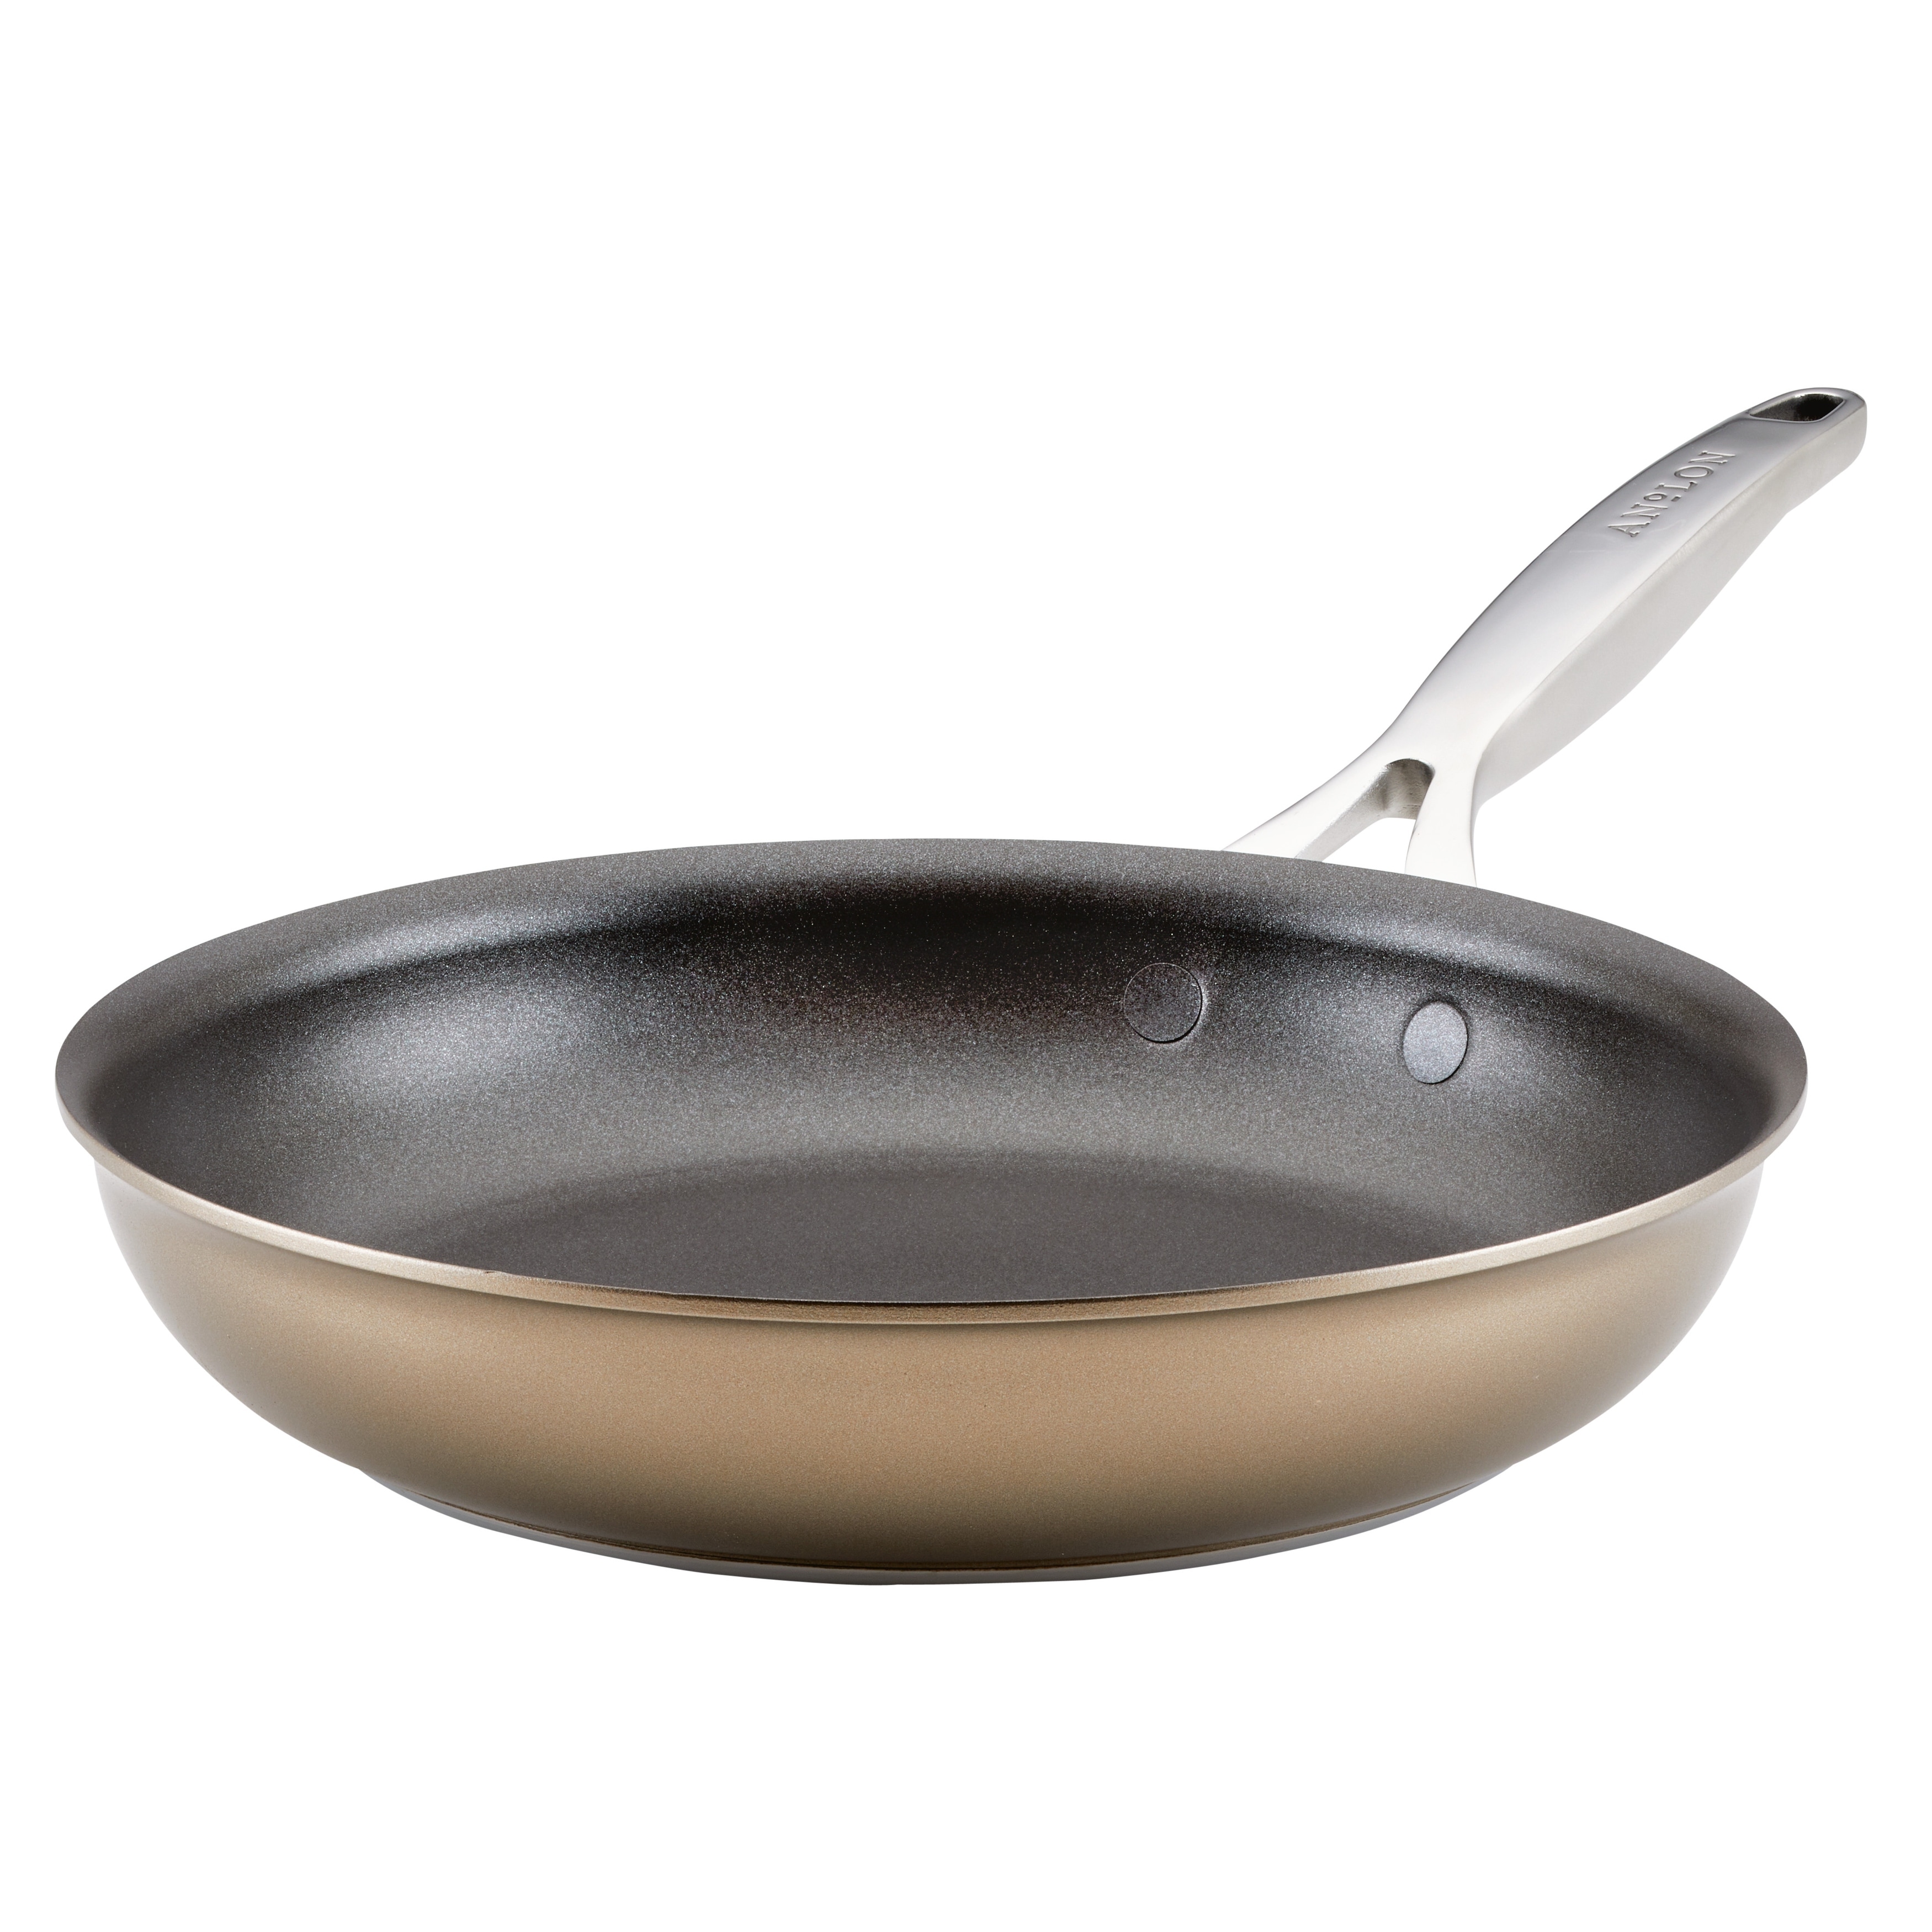 https://ak1.ostkcdn.com/images/products/is/images/direct/65ee093edfc57868e85e8675549ab3abe5bc6721/Anolon-Ascend-Hard-Anodized-Nonstick-Frying-Pan%2C-12-Inch%2C-Bronze.jpg